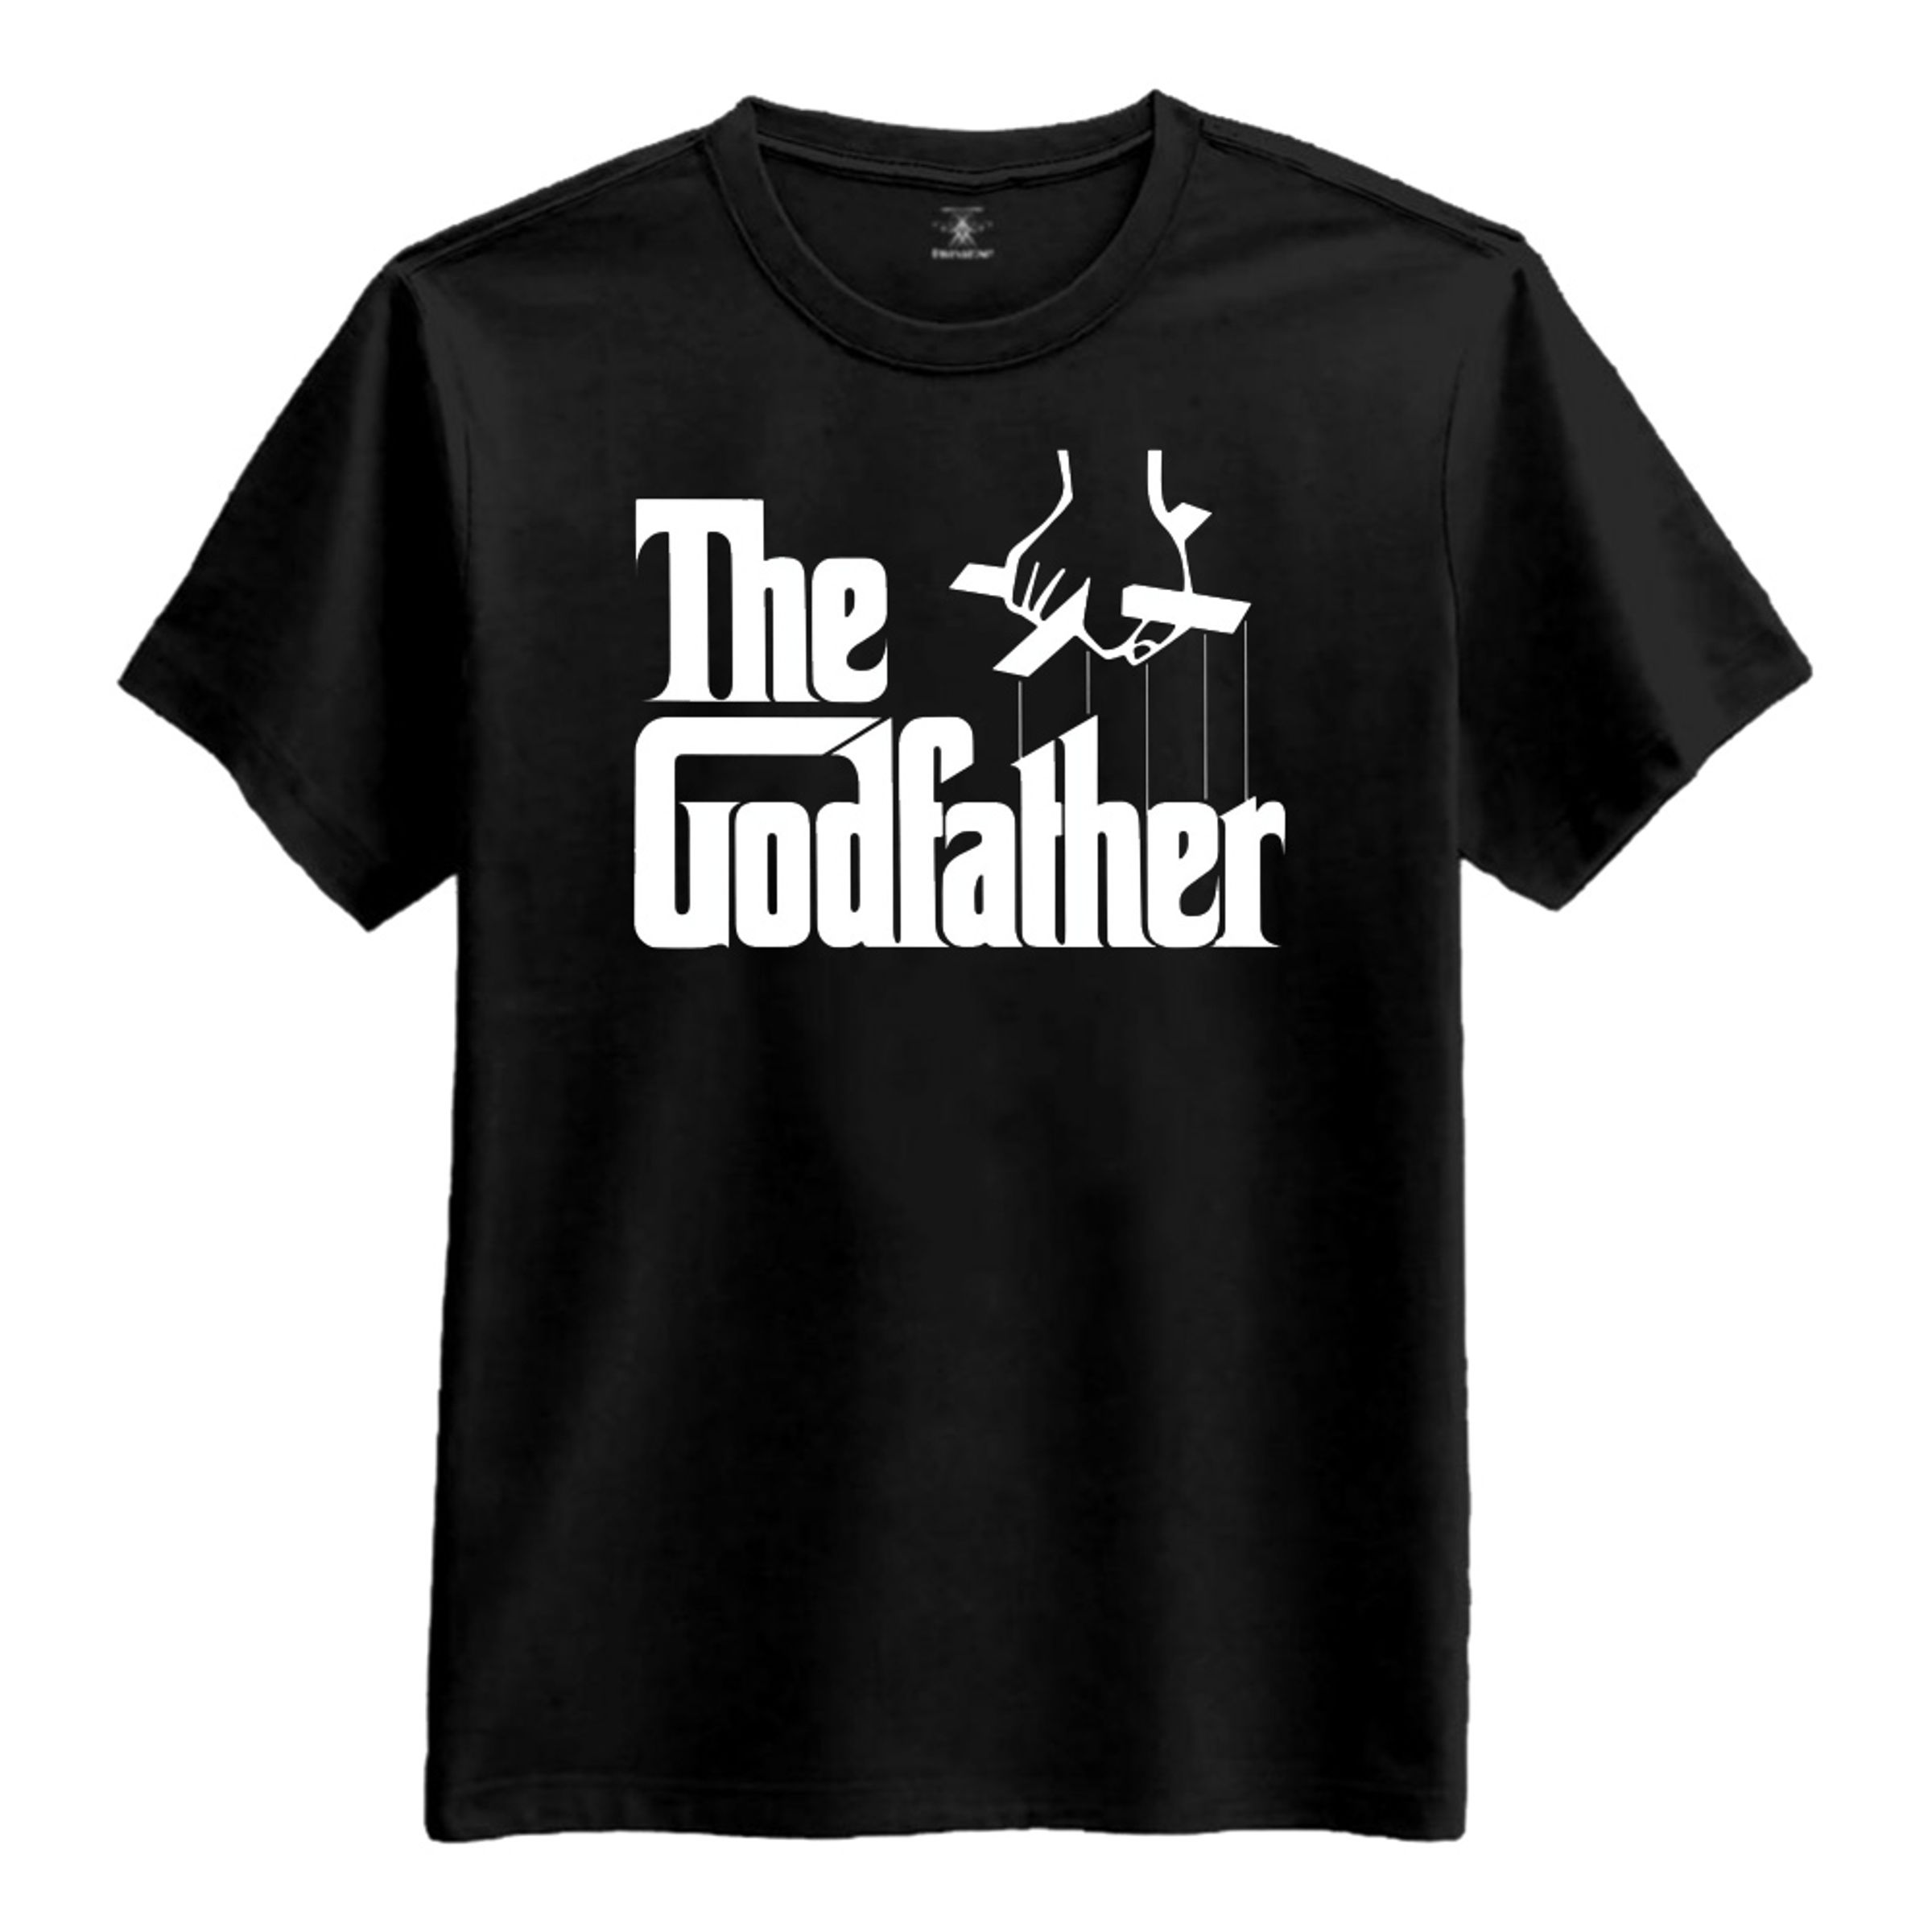 The Godfather T-shirt - Large